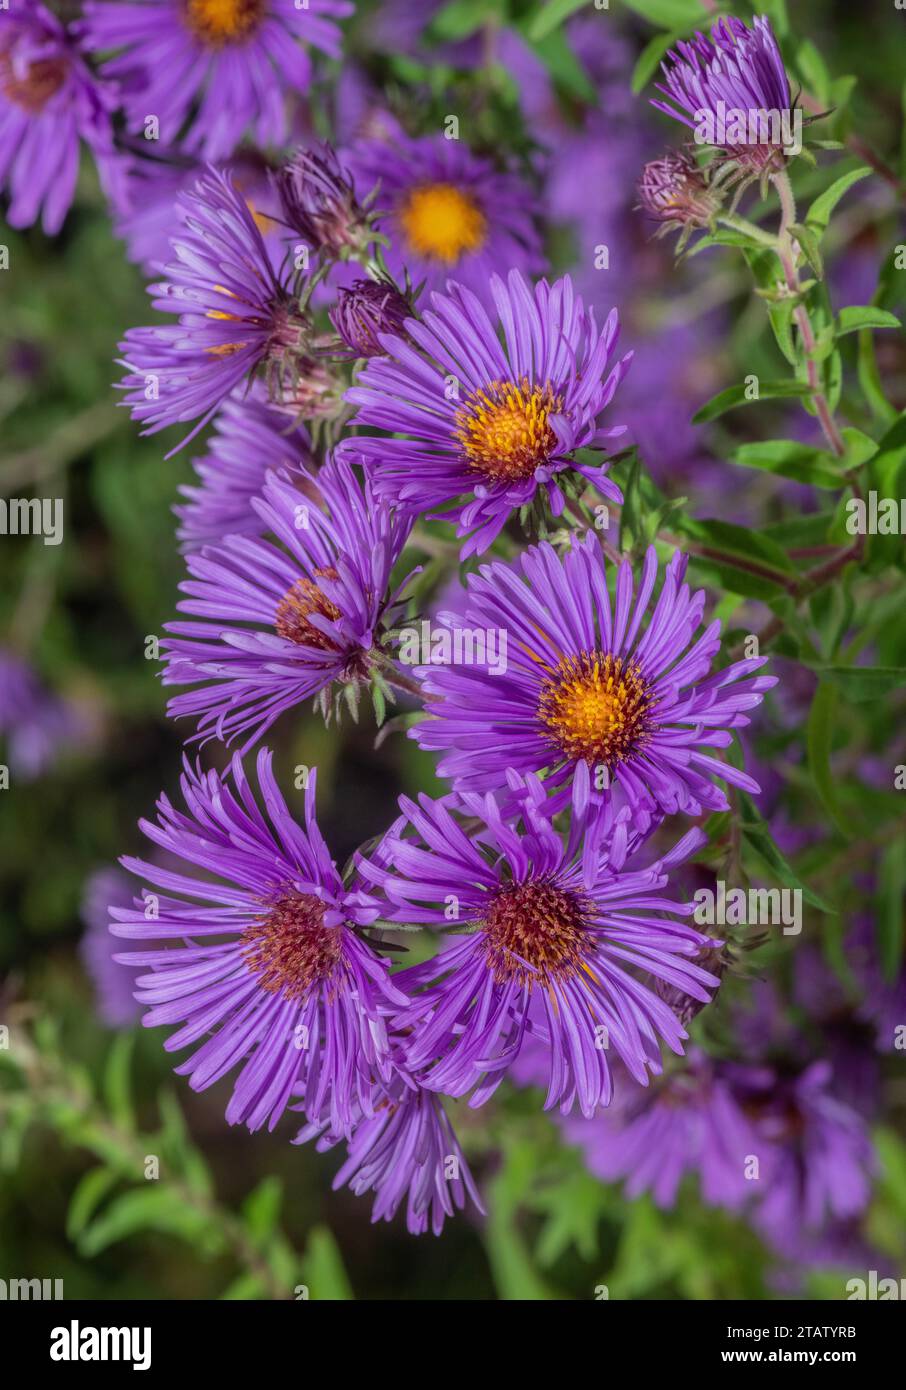 Michaelmas daisy, Symphyotrichum novae-angliae, in flower in autumn. Stock Photo